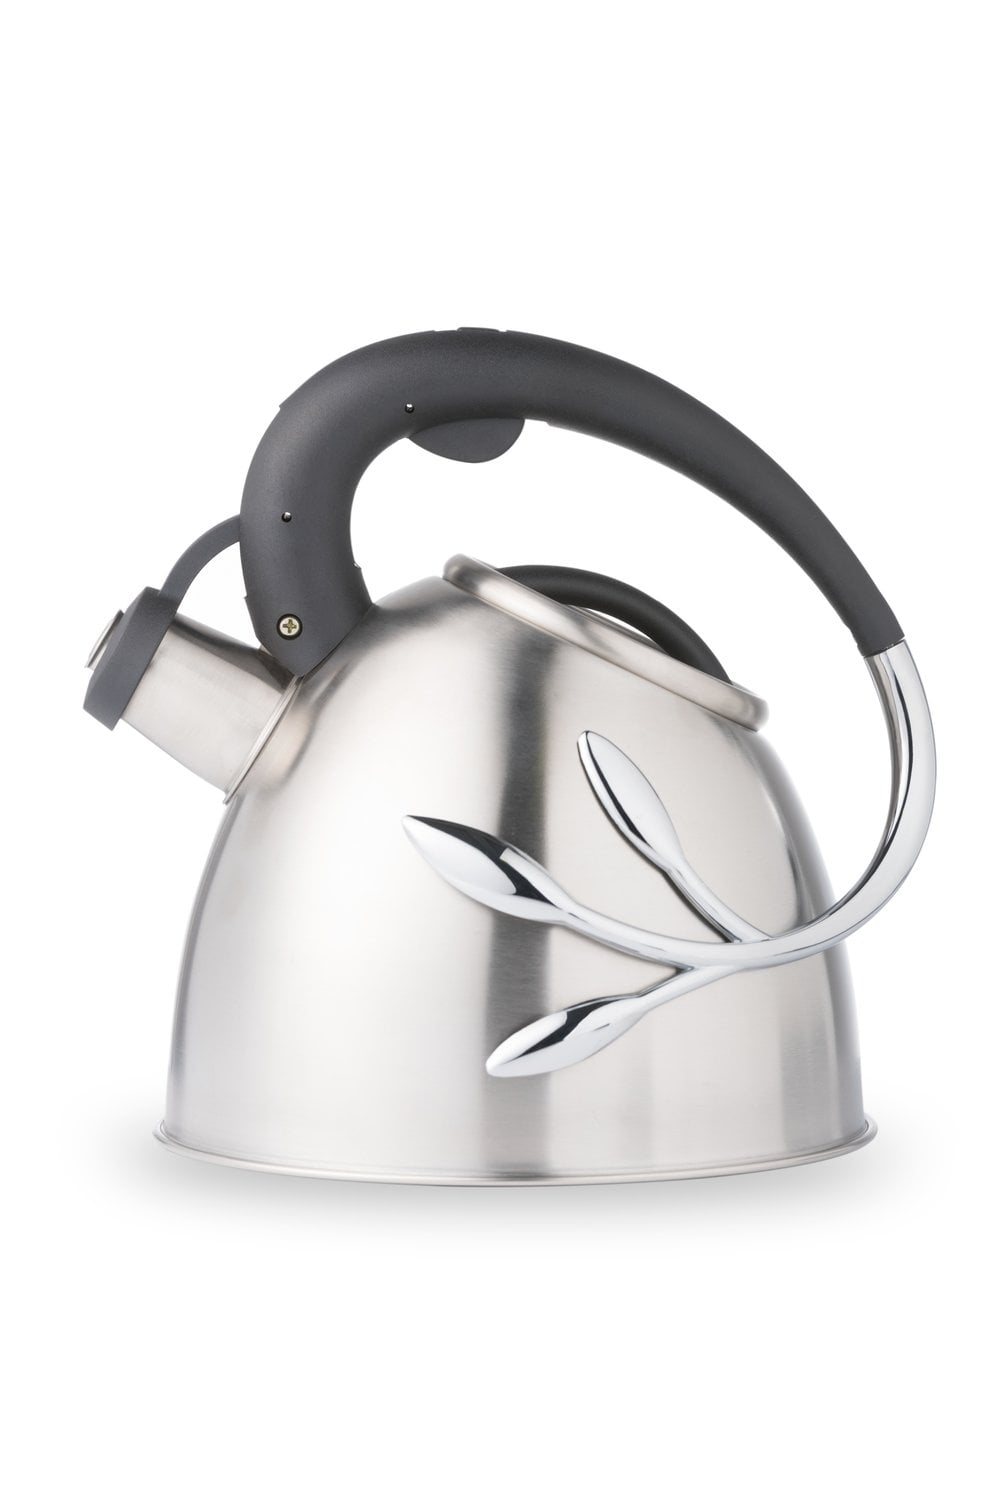 Dropship Camping Kitchen Office Use Stainless Steel Whistling Tea